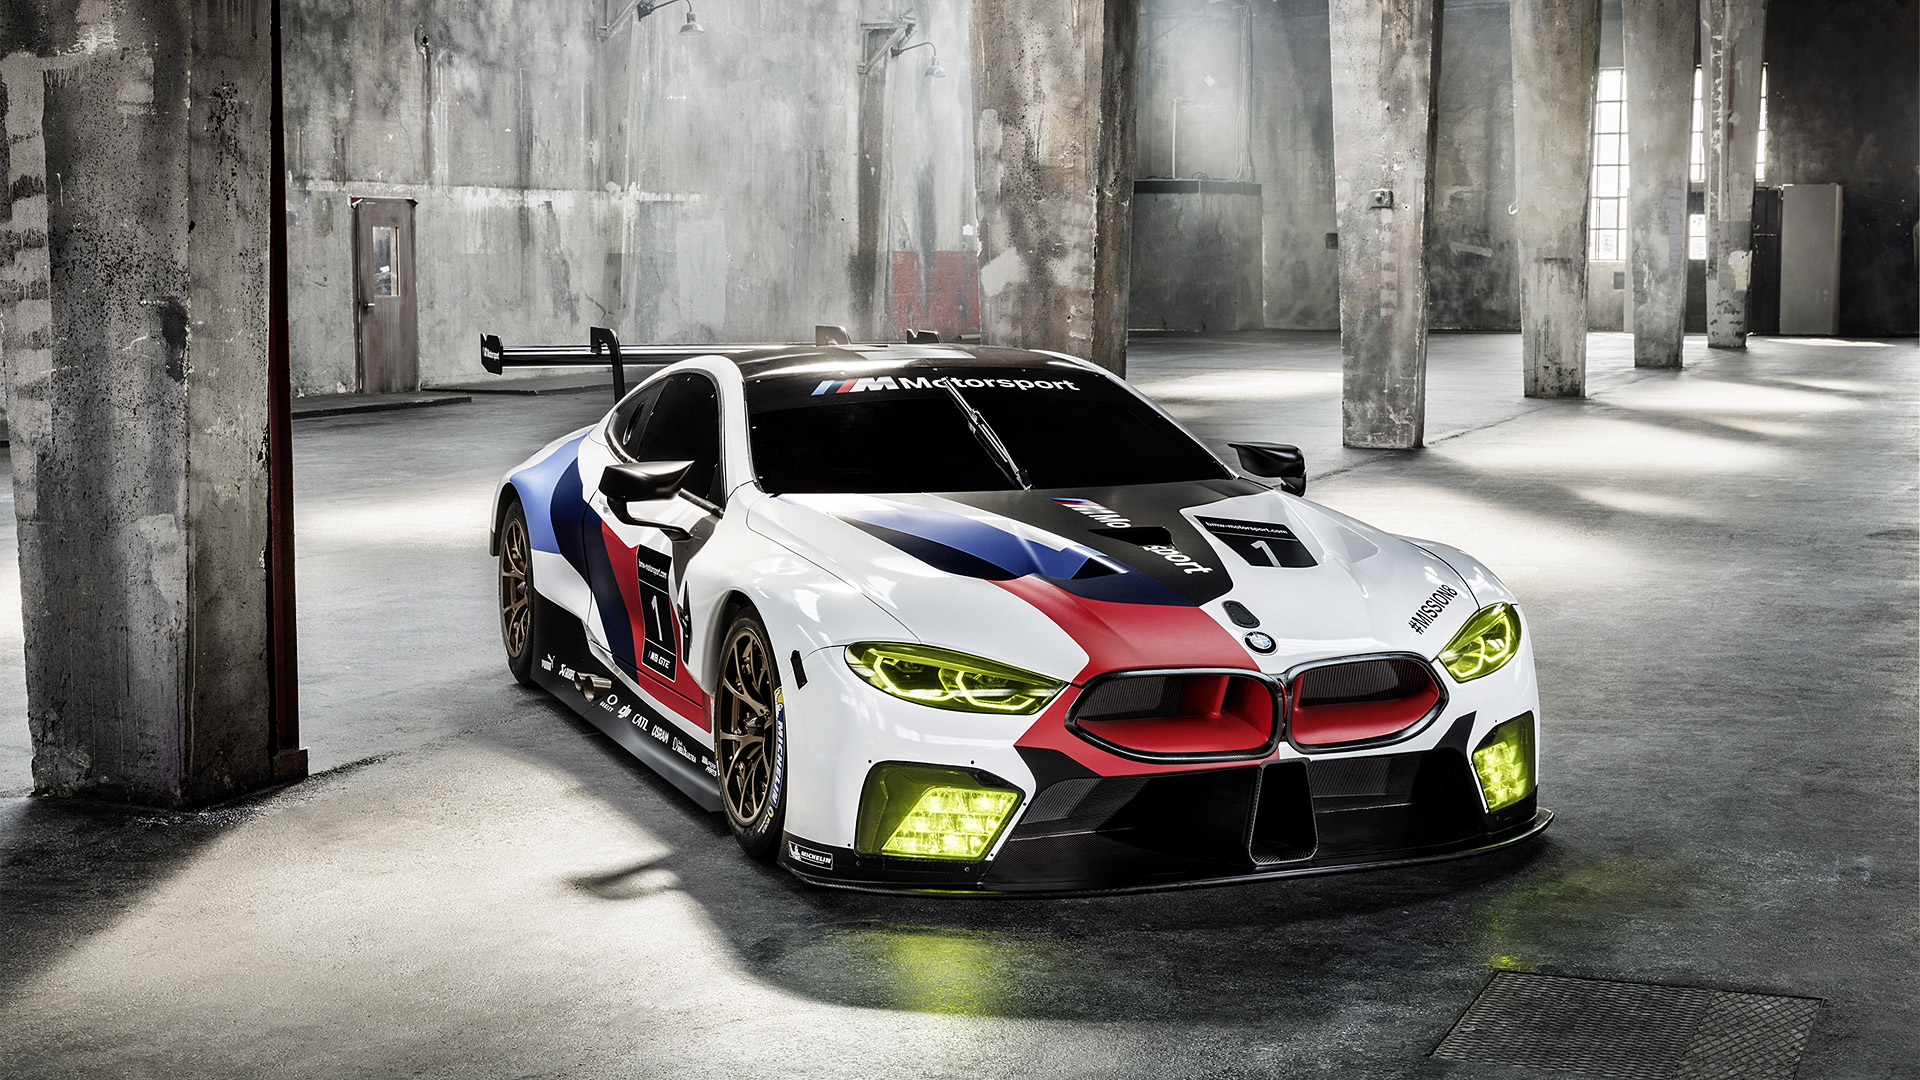 Bmw M8 Gte Wallpaper HD Image Wsupercars